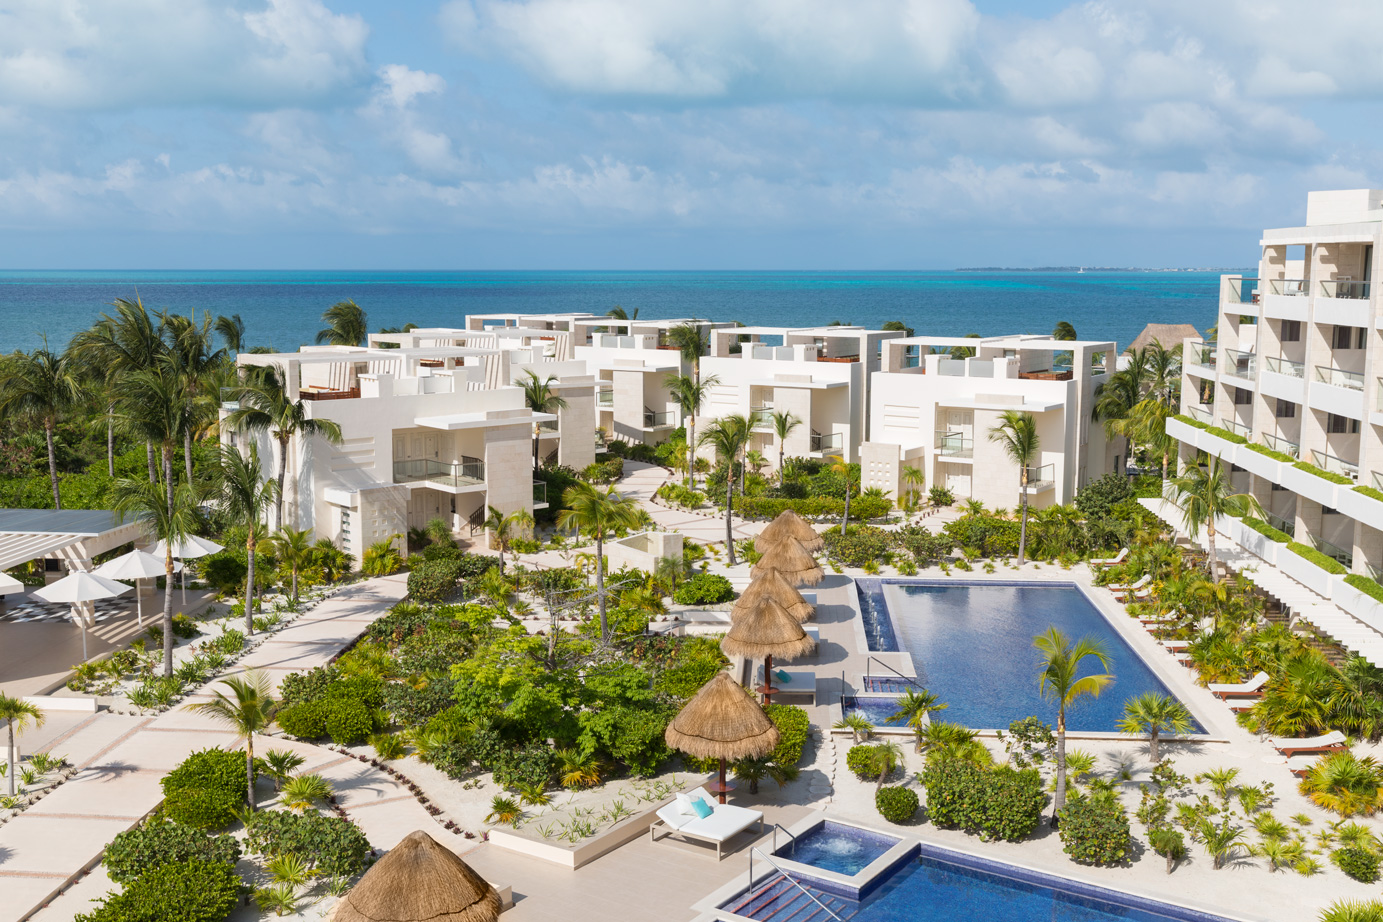 Beloved Playa Mujeres, one of the best hotels and best luxury hotels in Mexico